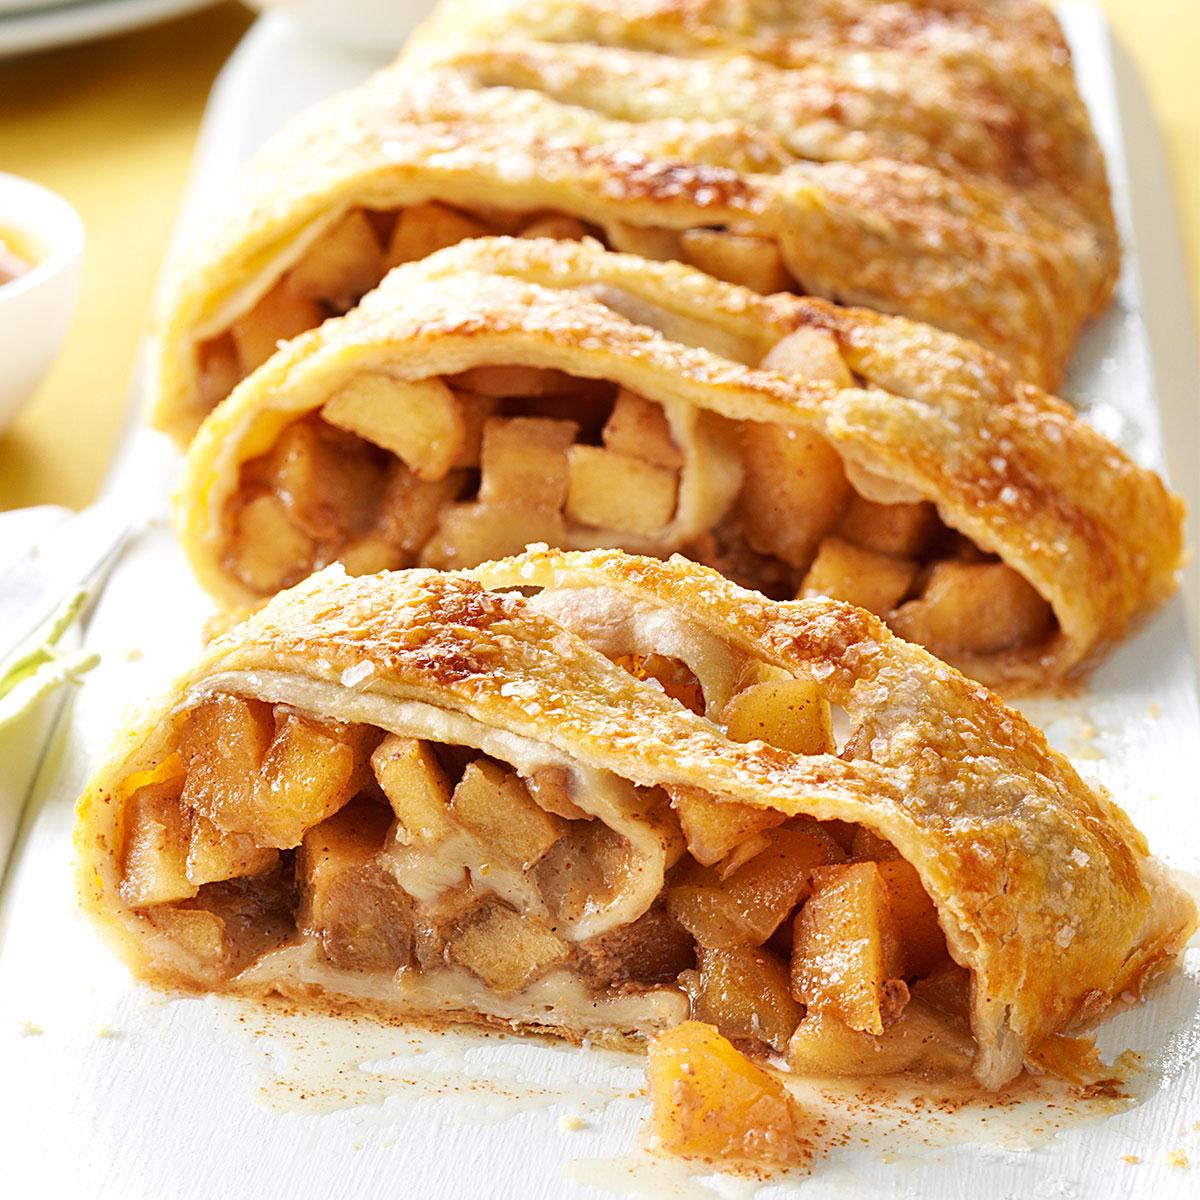 Did You Know I Can Tell How Adventurous You Are Purely by the Assorted International Foods You Choose? apple Strudel